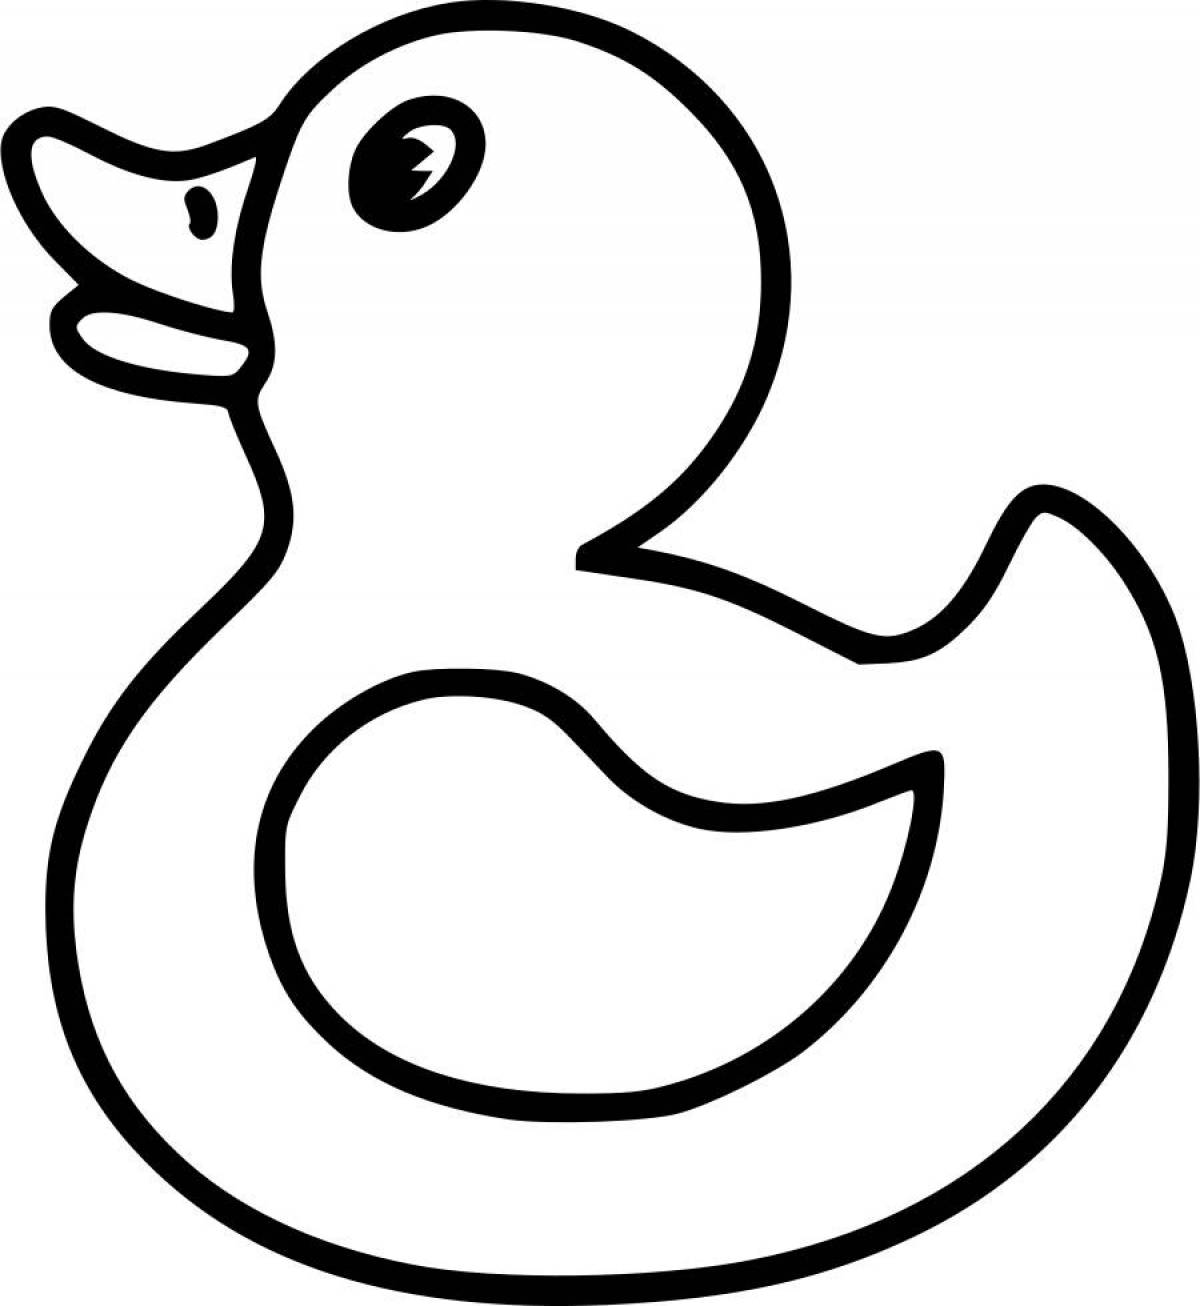 Blessed duckling coloring page for kids